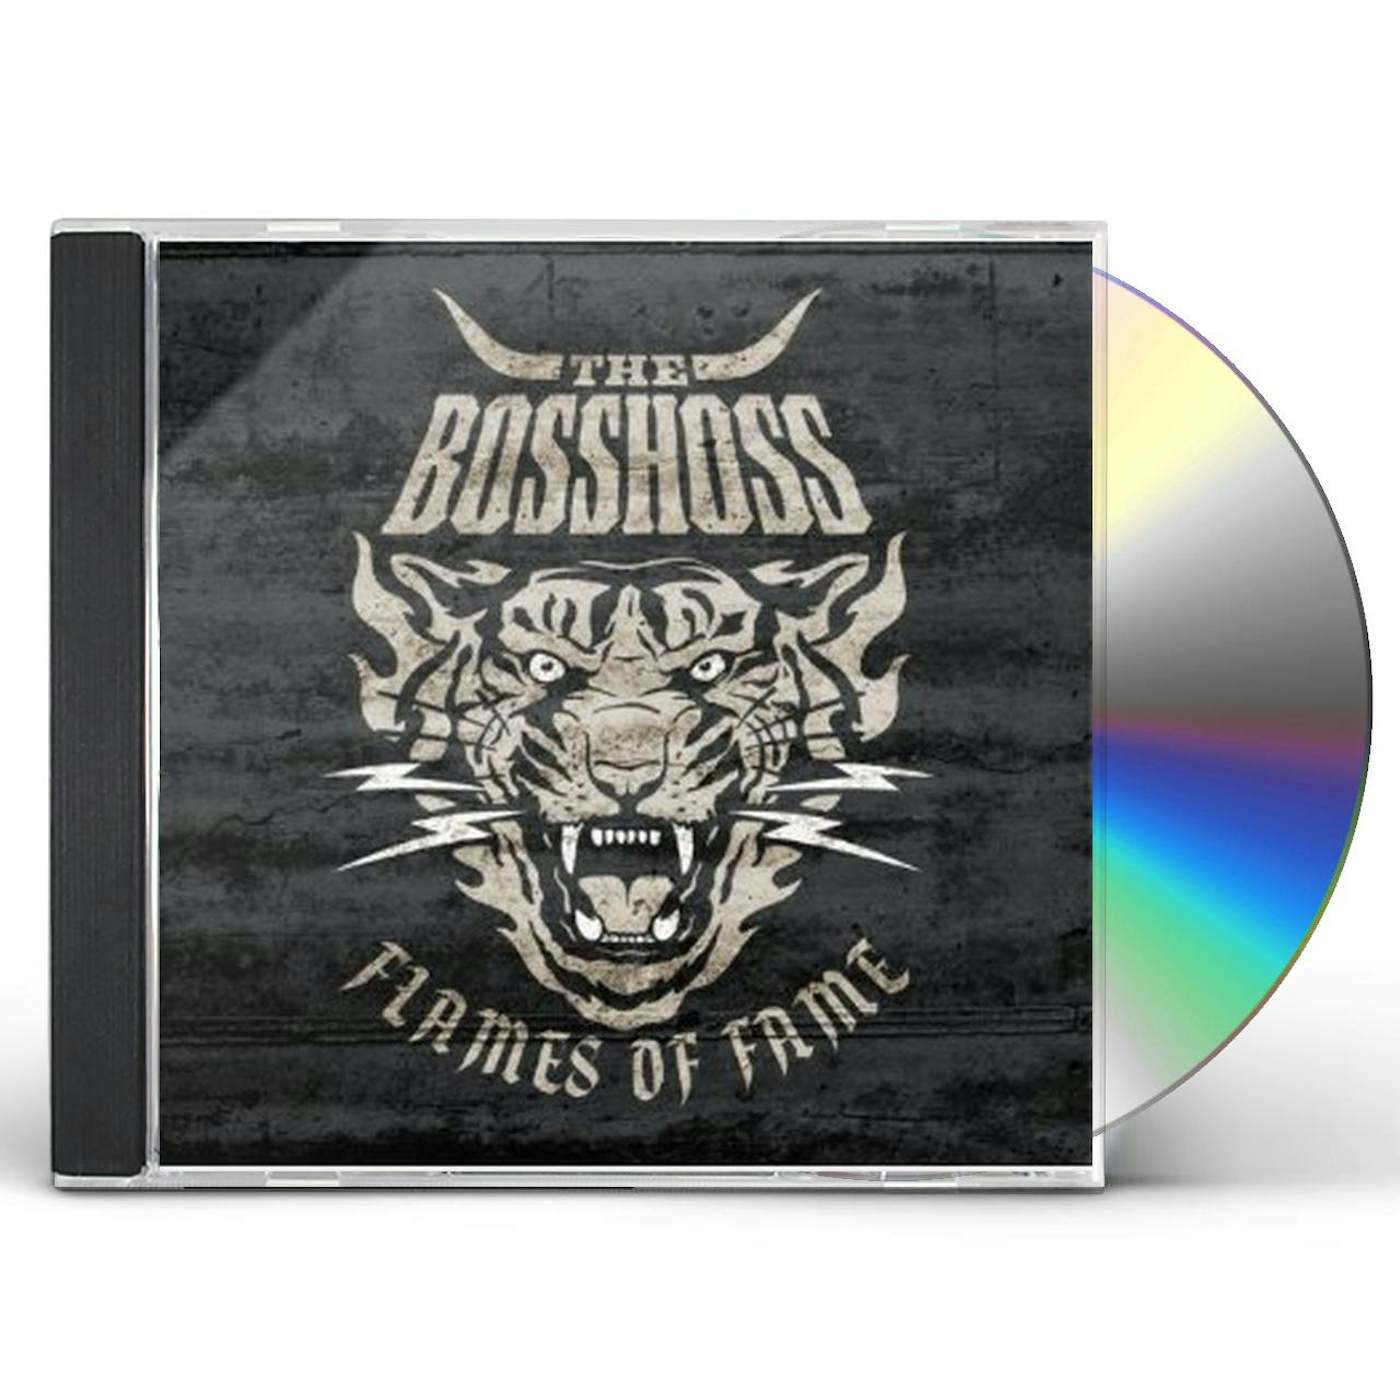 The BossHoss FLAMES OF FAME CD